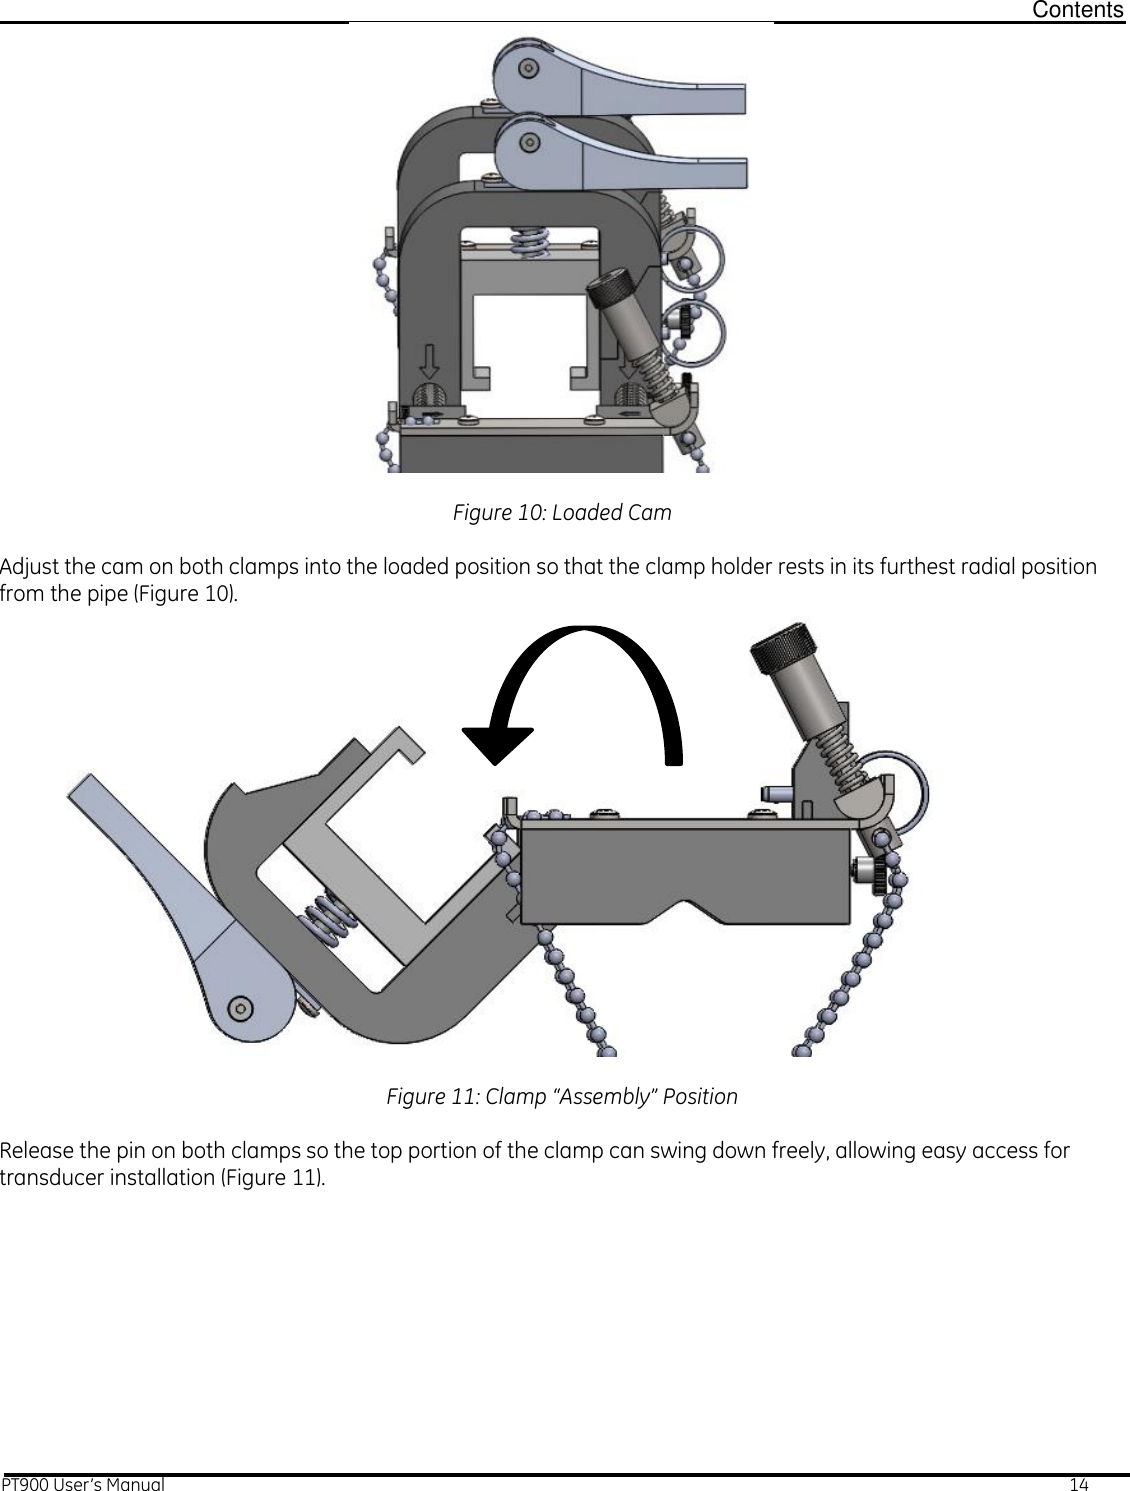  Contents PT900 User’s Manual                                                                                                                                                                                                                14   Figure 10: Loaded Cam  Adjust the cam on both clamps into the loaded position so that the clamp holder rests in its furthest radial position from the pipe (Figure 10).              Figure 11: Clamp “Assembly” Position  Release the pin on both clamps so the top portion of the clamp can swing down freely, allowing easy access for transducer installation (Figure 11).  